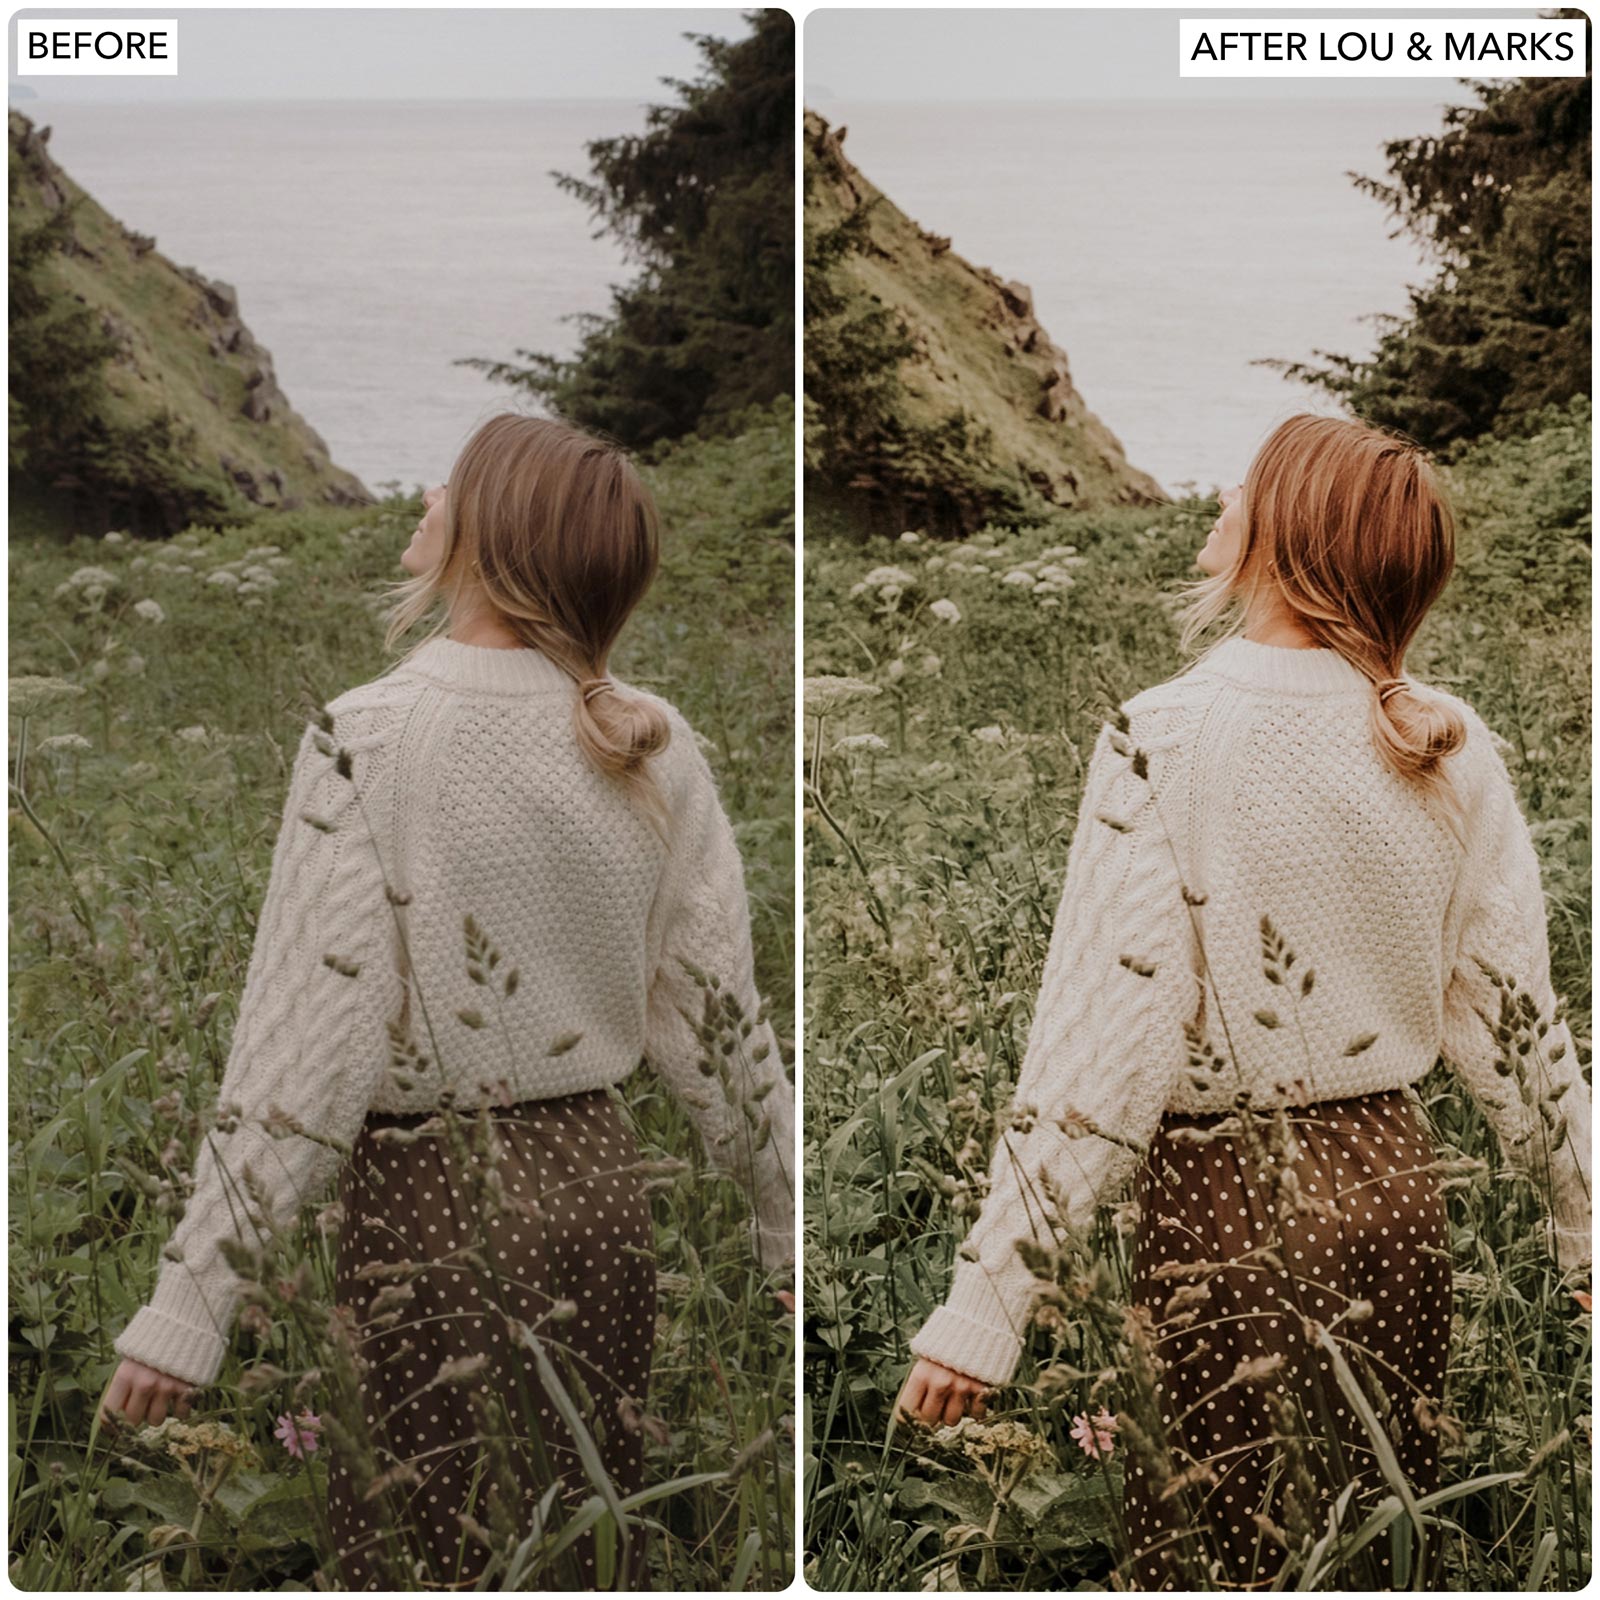 Creamy Moody Photoshop Presets For Adobe Lightroom By Lou Marks Presets